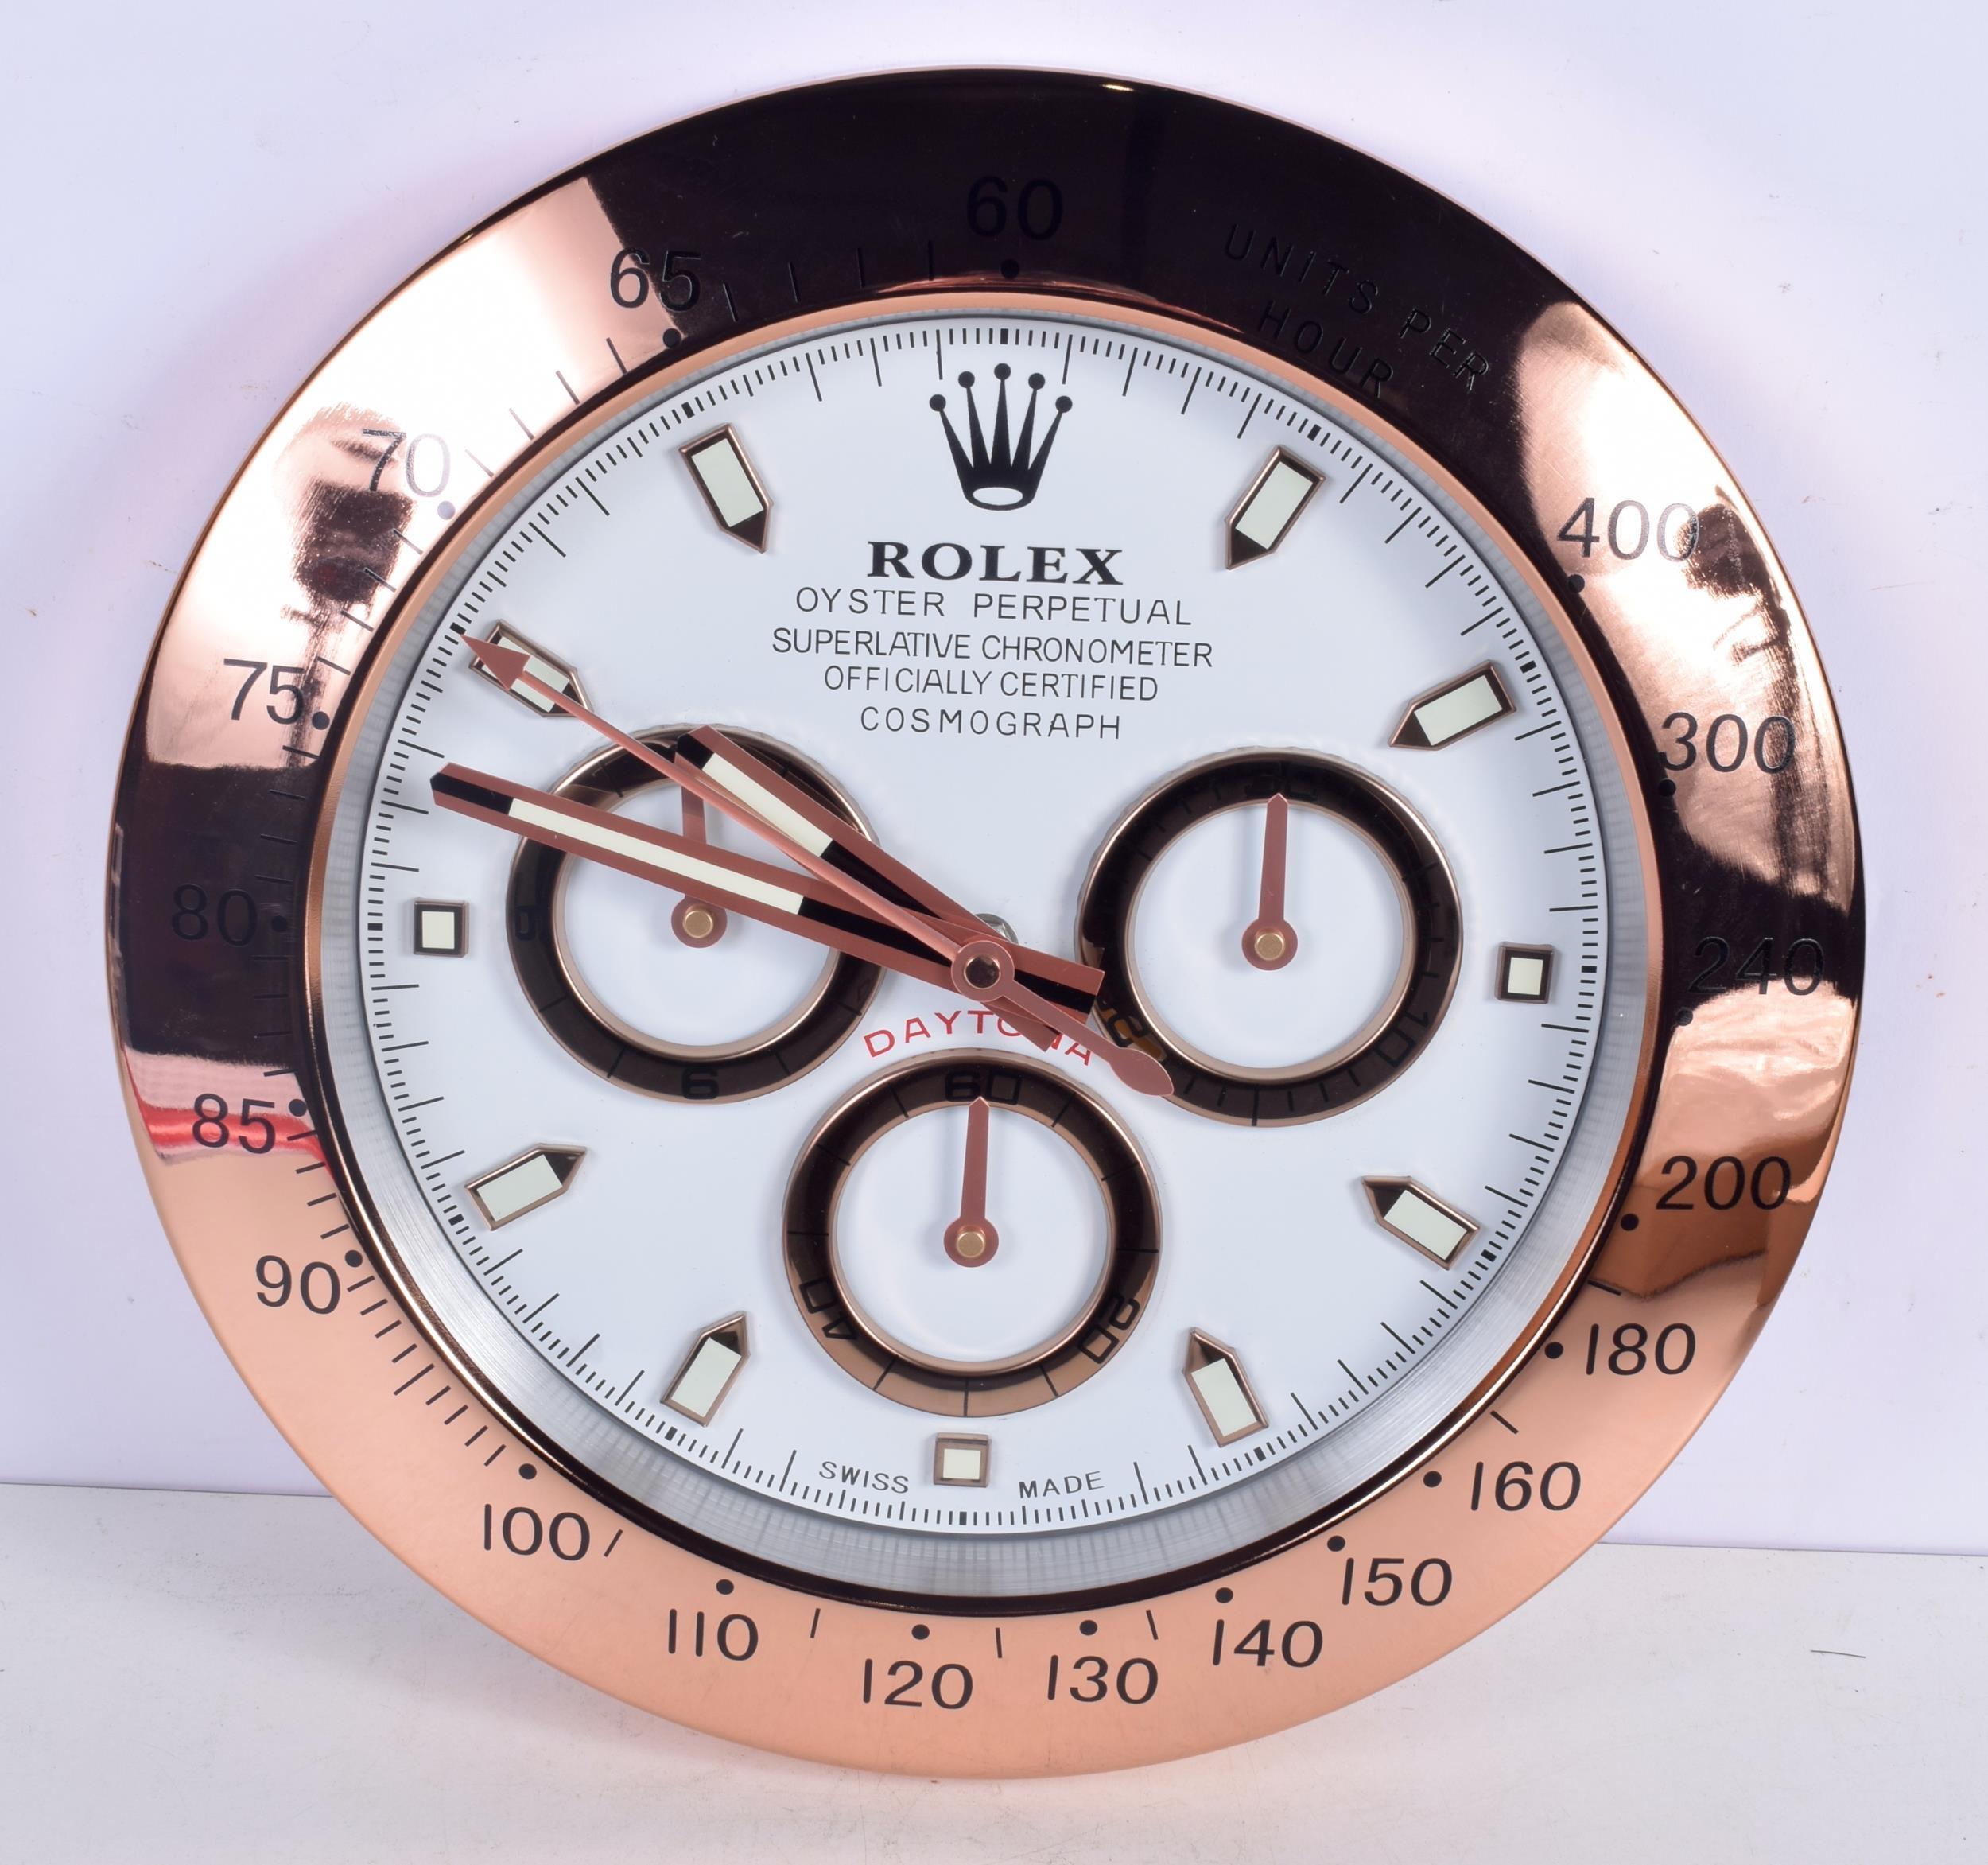 ROLEX Officially Certified Oyster Perpetual Cosmograph Daytona Wall Clock 
Lume strips Sweeping Quartz movement powered by single AA Battery.
Clock dimensions measure approximately 35cm by 5cm thickness
Free international shipping.